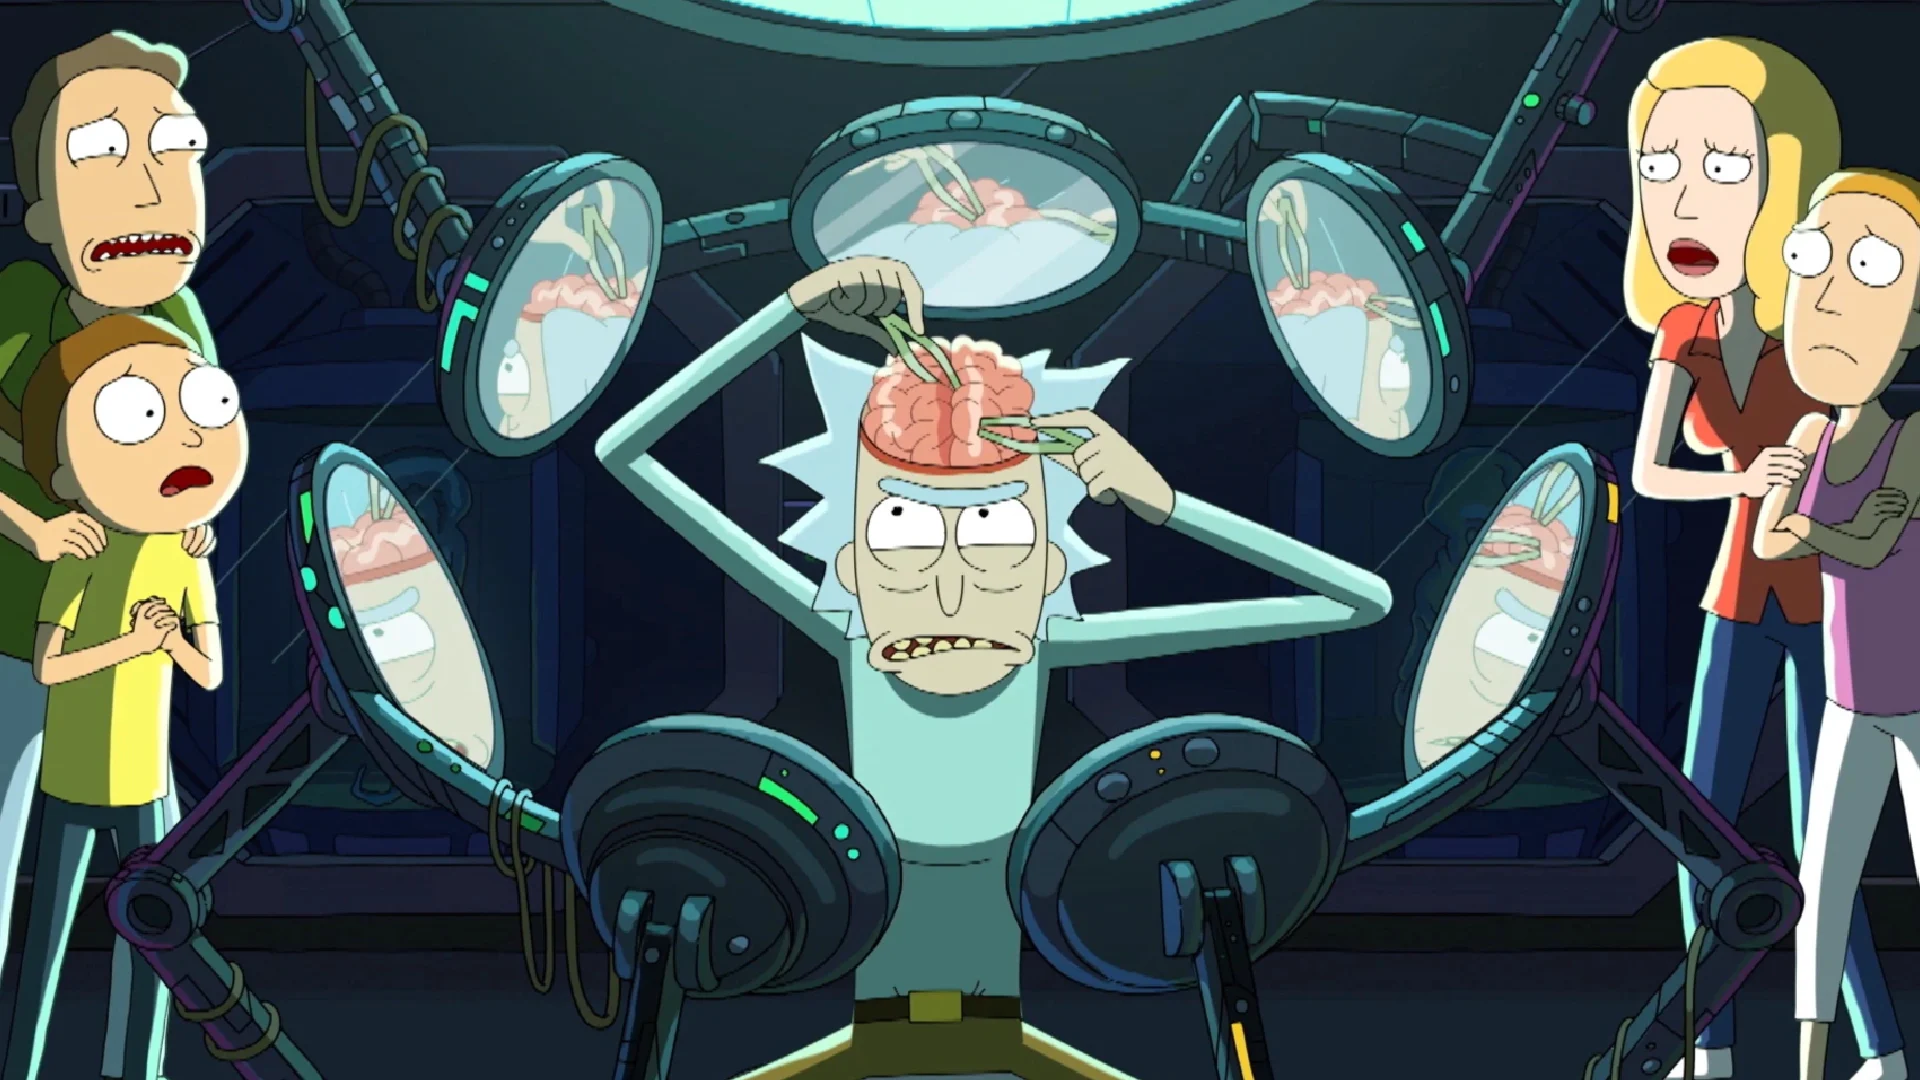 Rick and Morty' Showrunner Reveals Season 6 Episodes Are More "se...